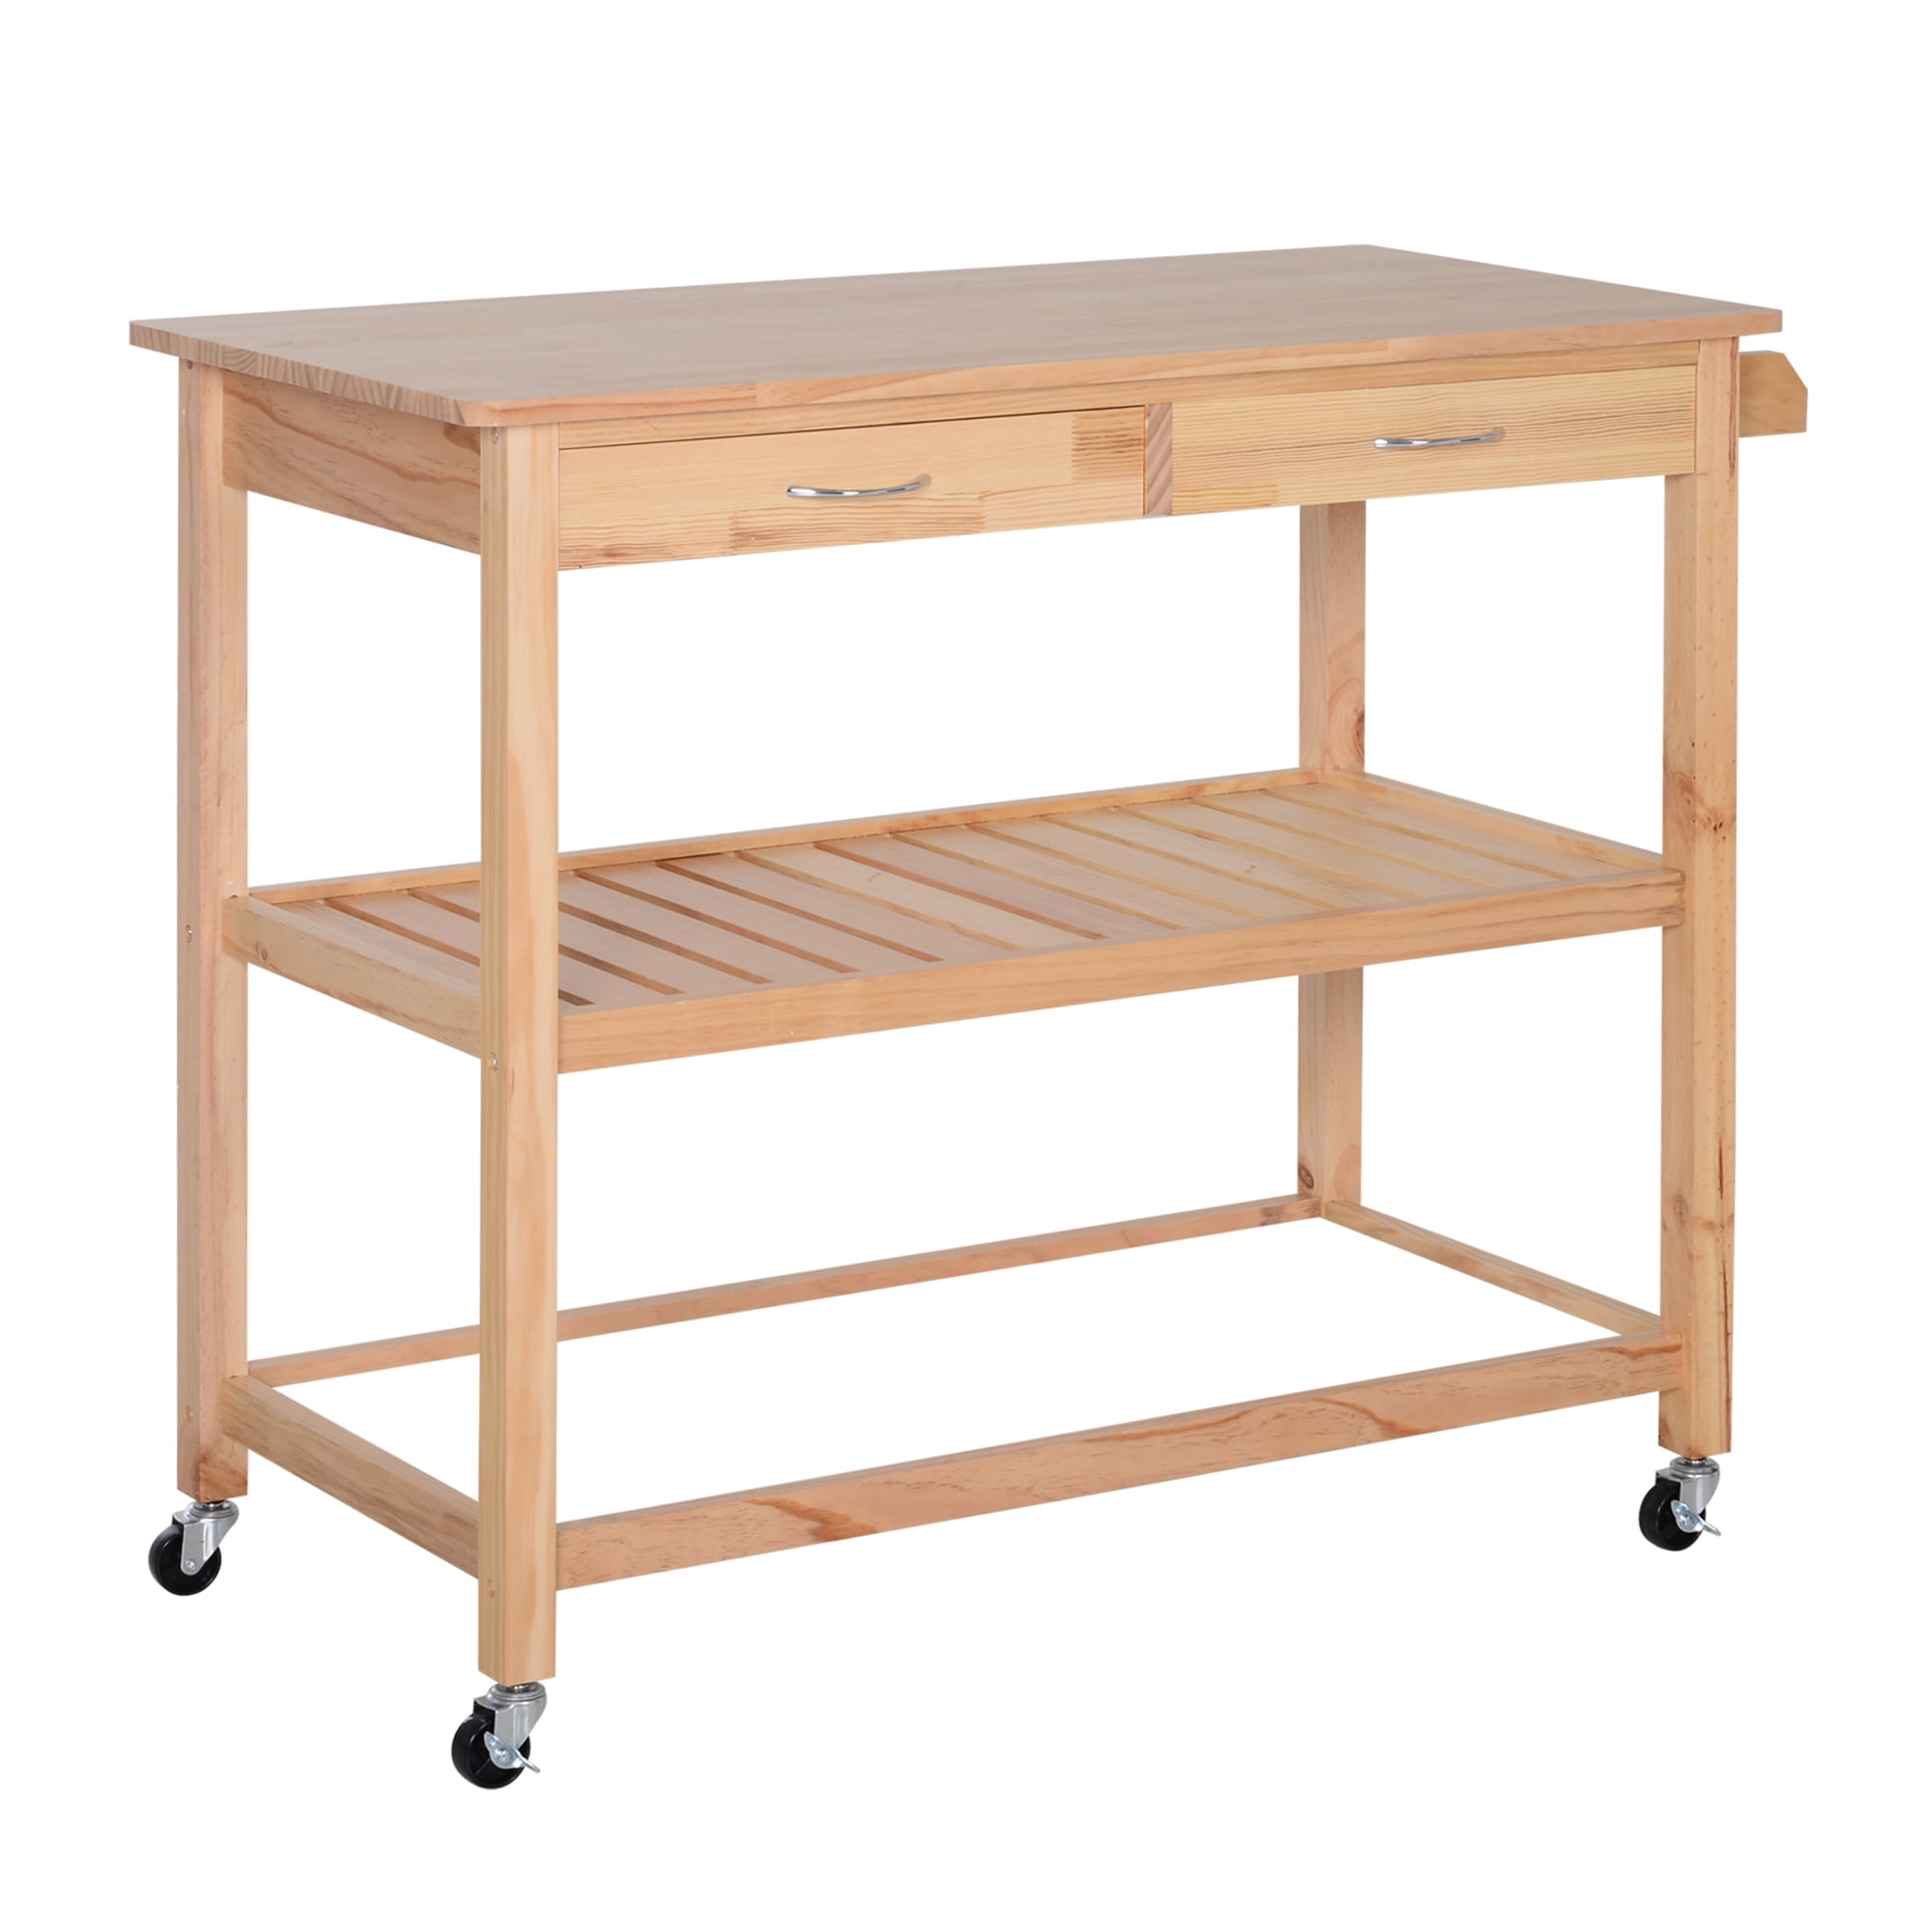 Bamboo SPZC-06 Bathroom SogesPower Storage Kitchen Cart Serving Bar Cart Utility Trolley Organizer Rack with 3 Shelves for Living Room